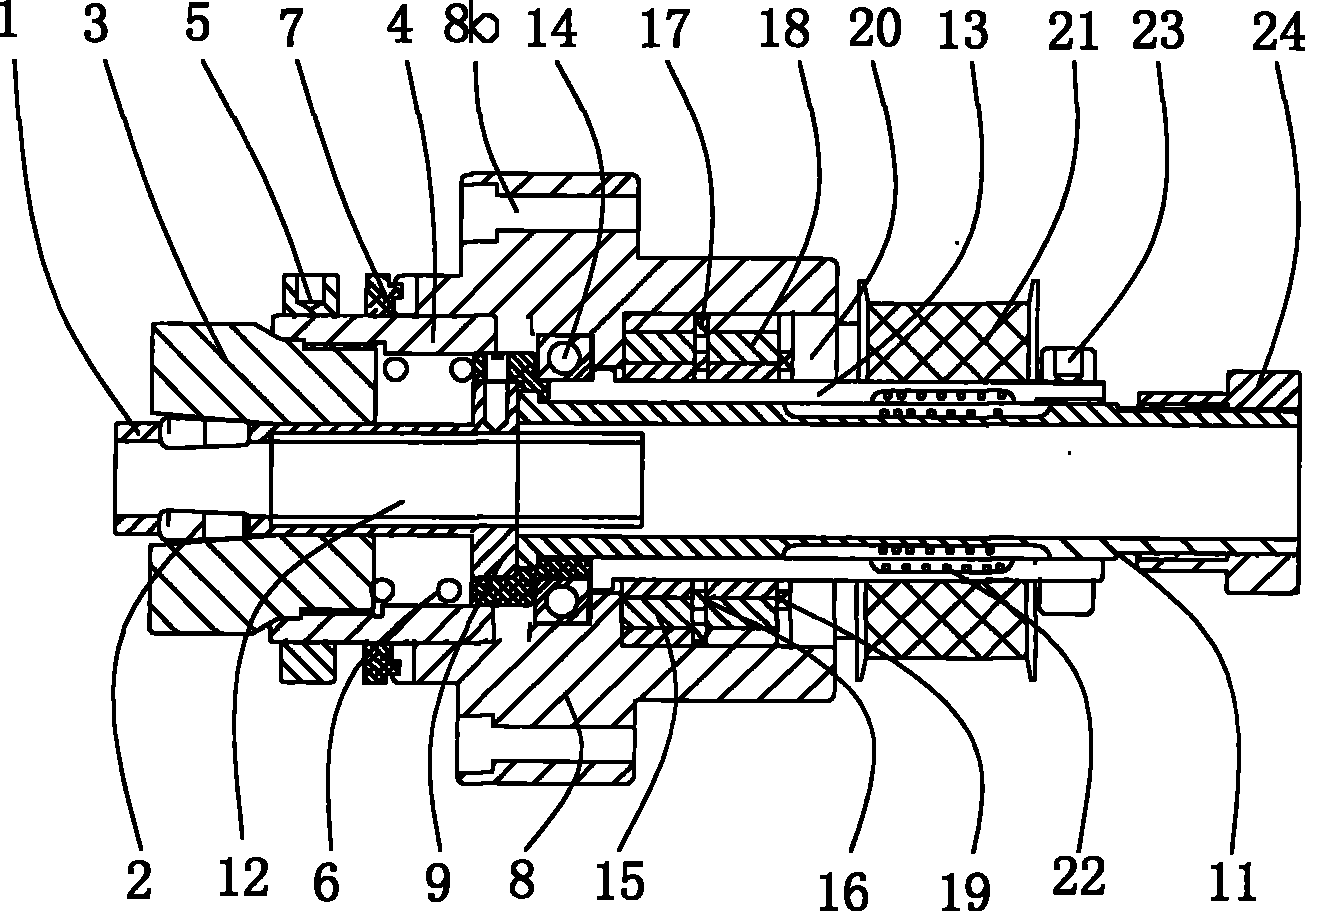 Excircle surface rolling device